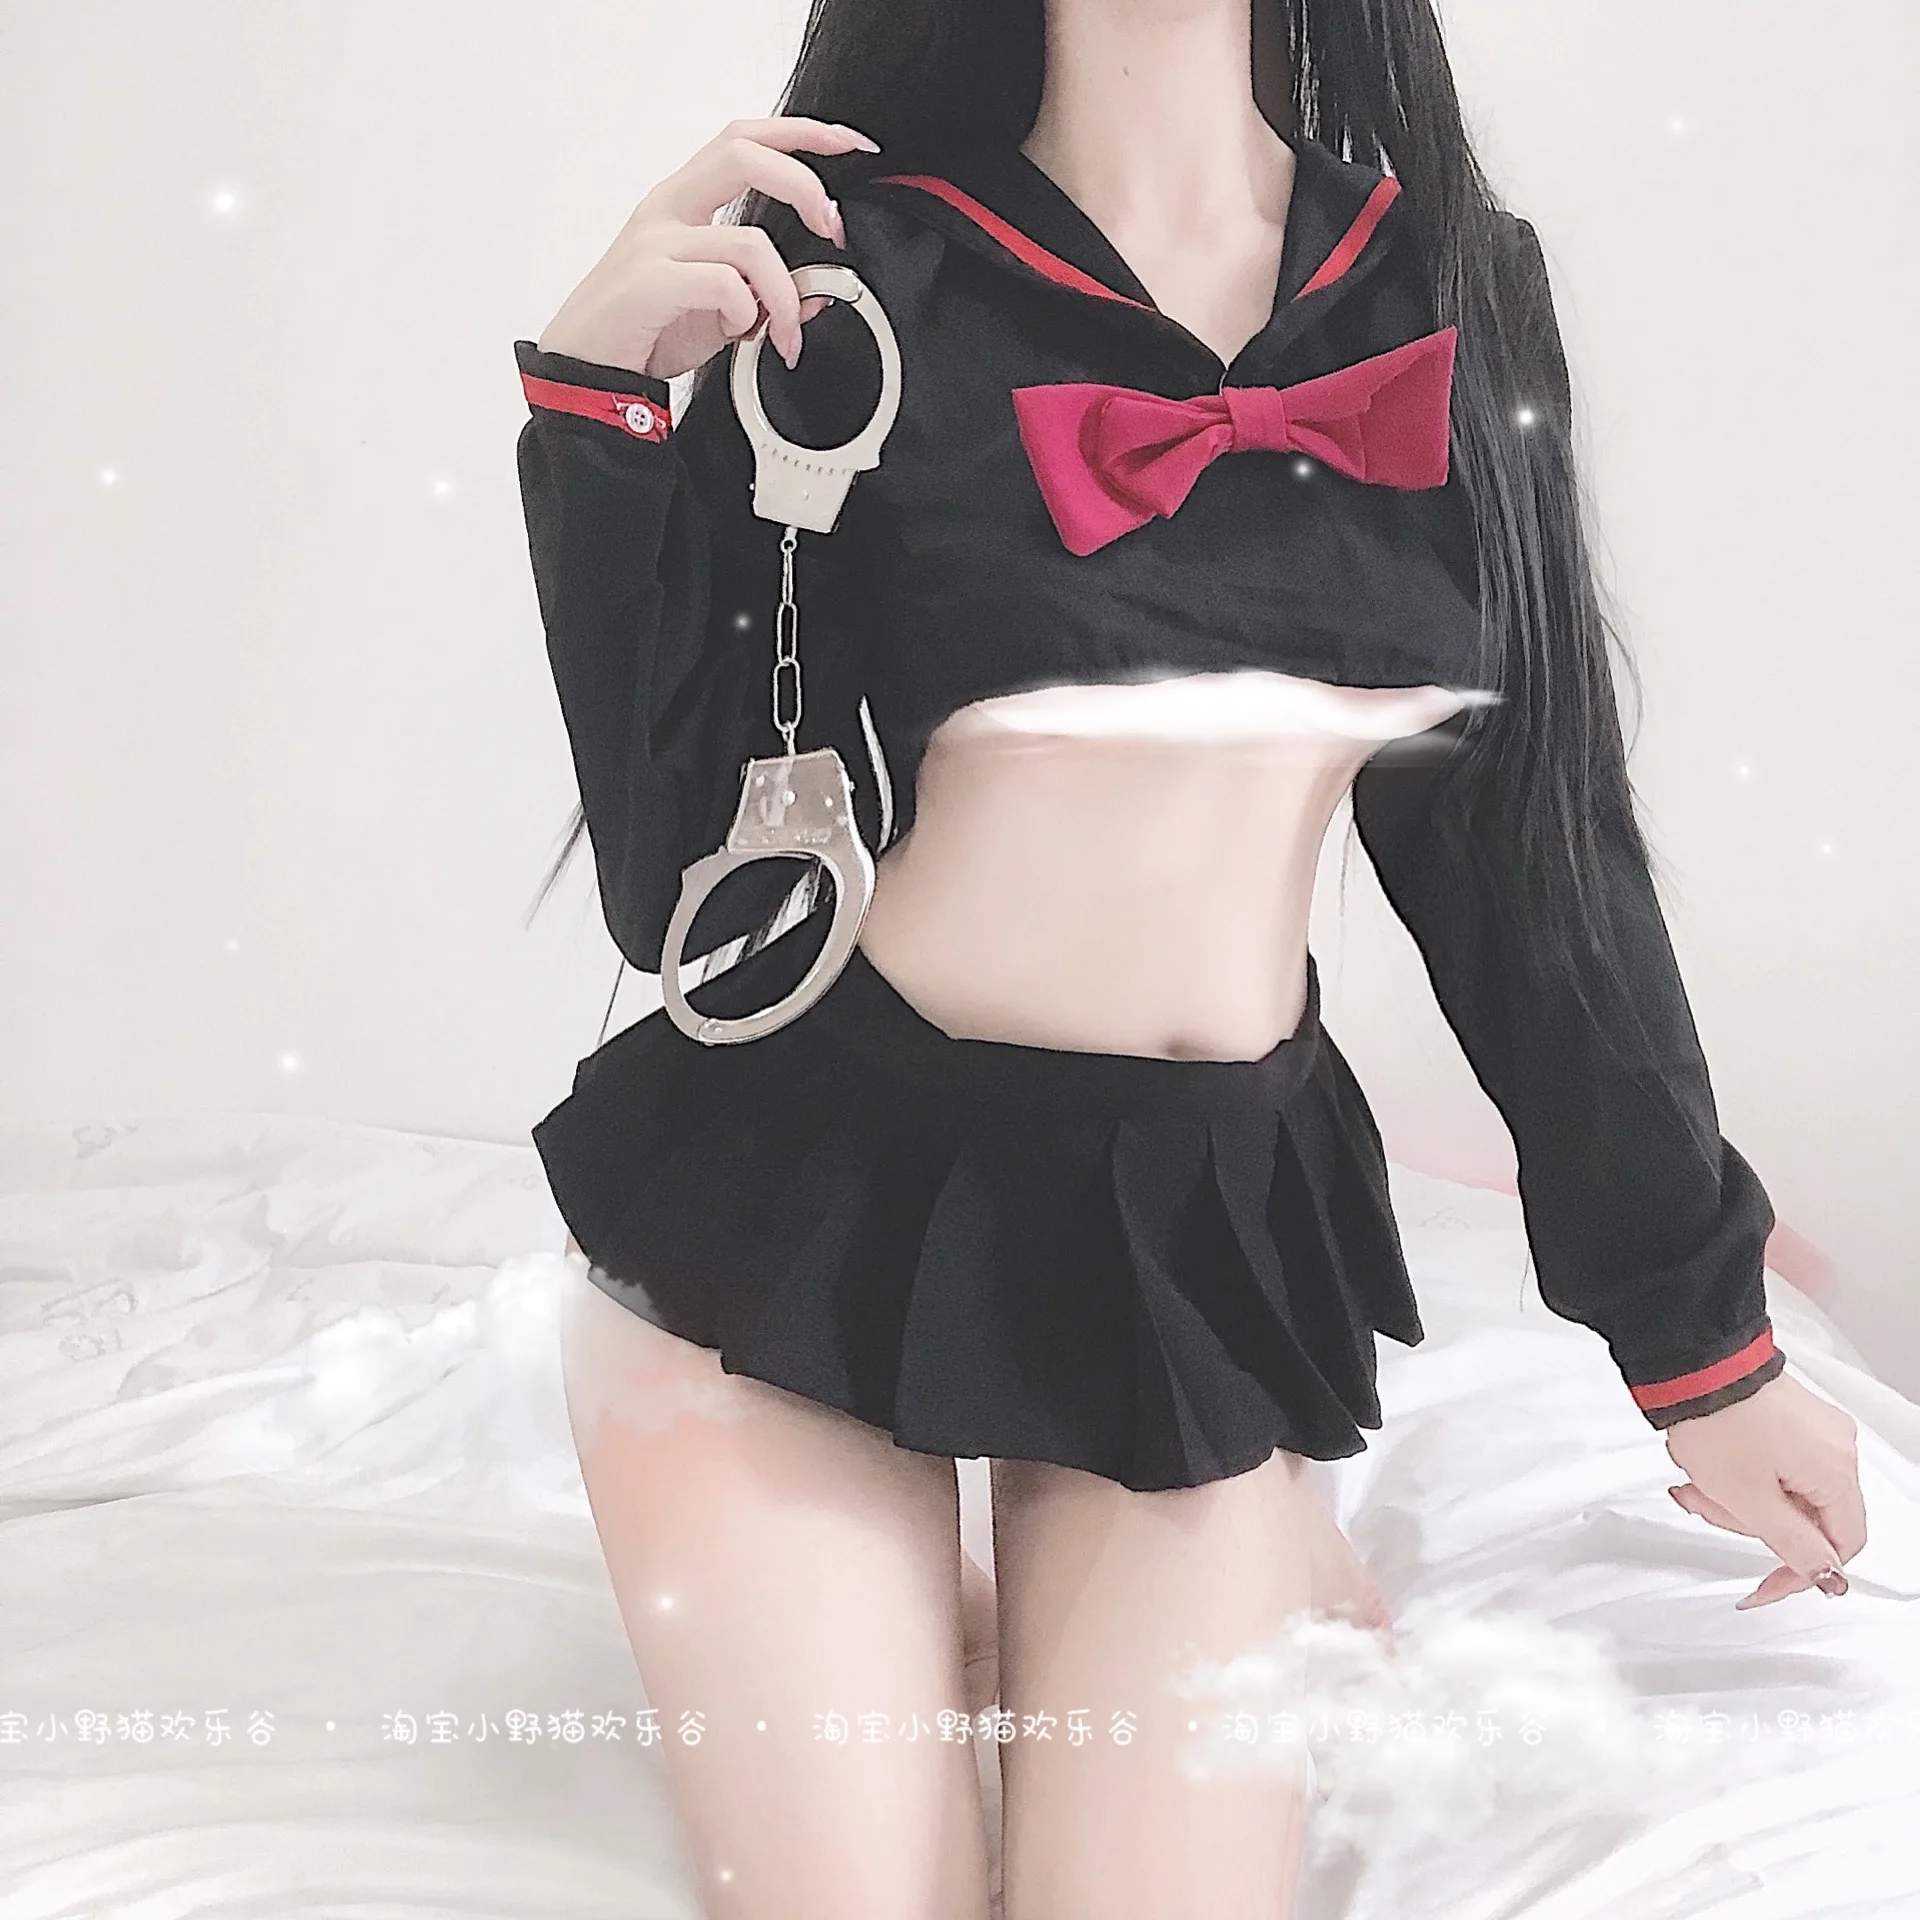 

JK Uniform Mini Skirt Japanese Student Role Play Set Sexy Temptation School Girl Cosplay Outfit Erotic Charming College Style